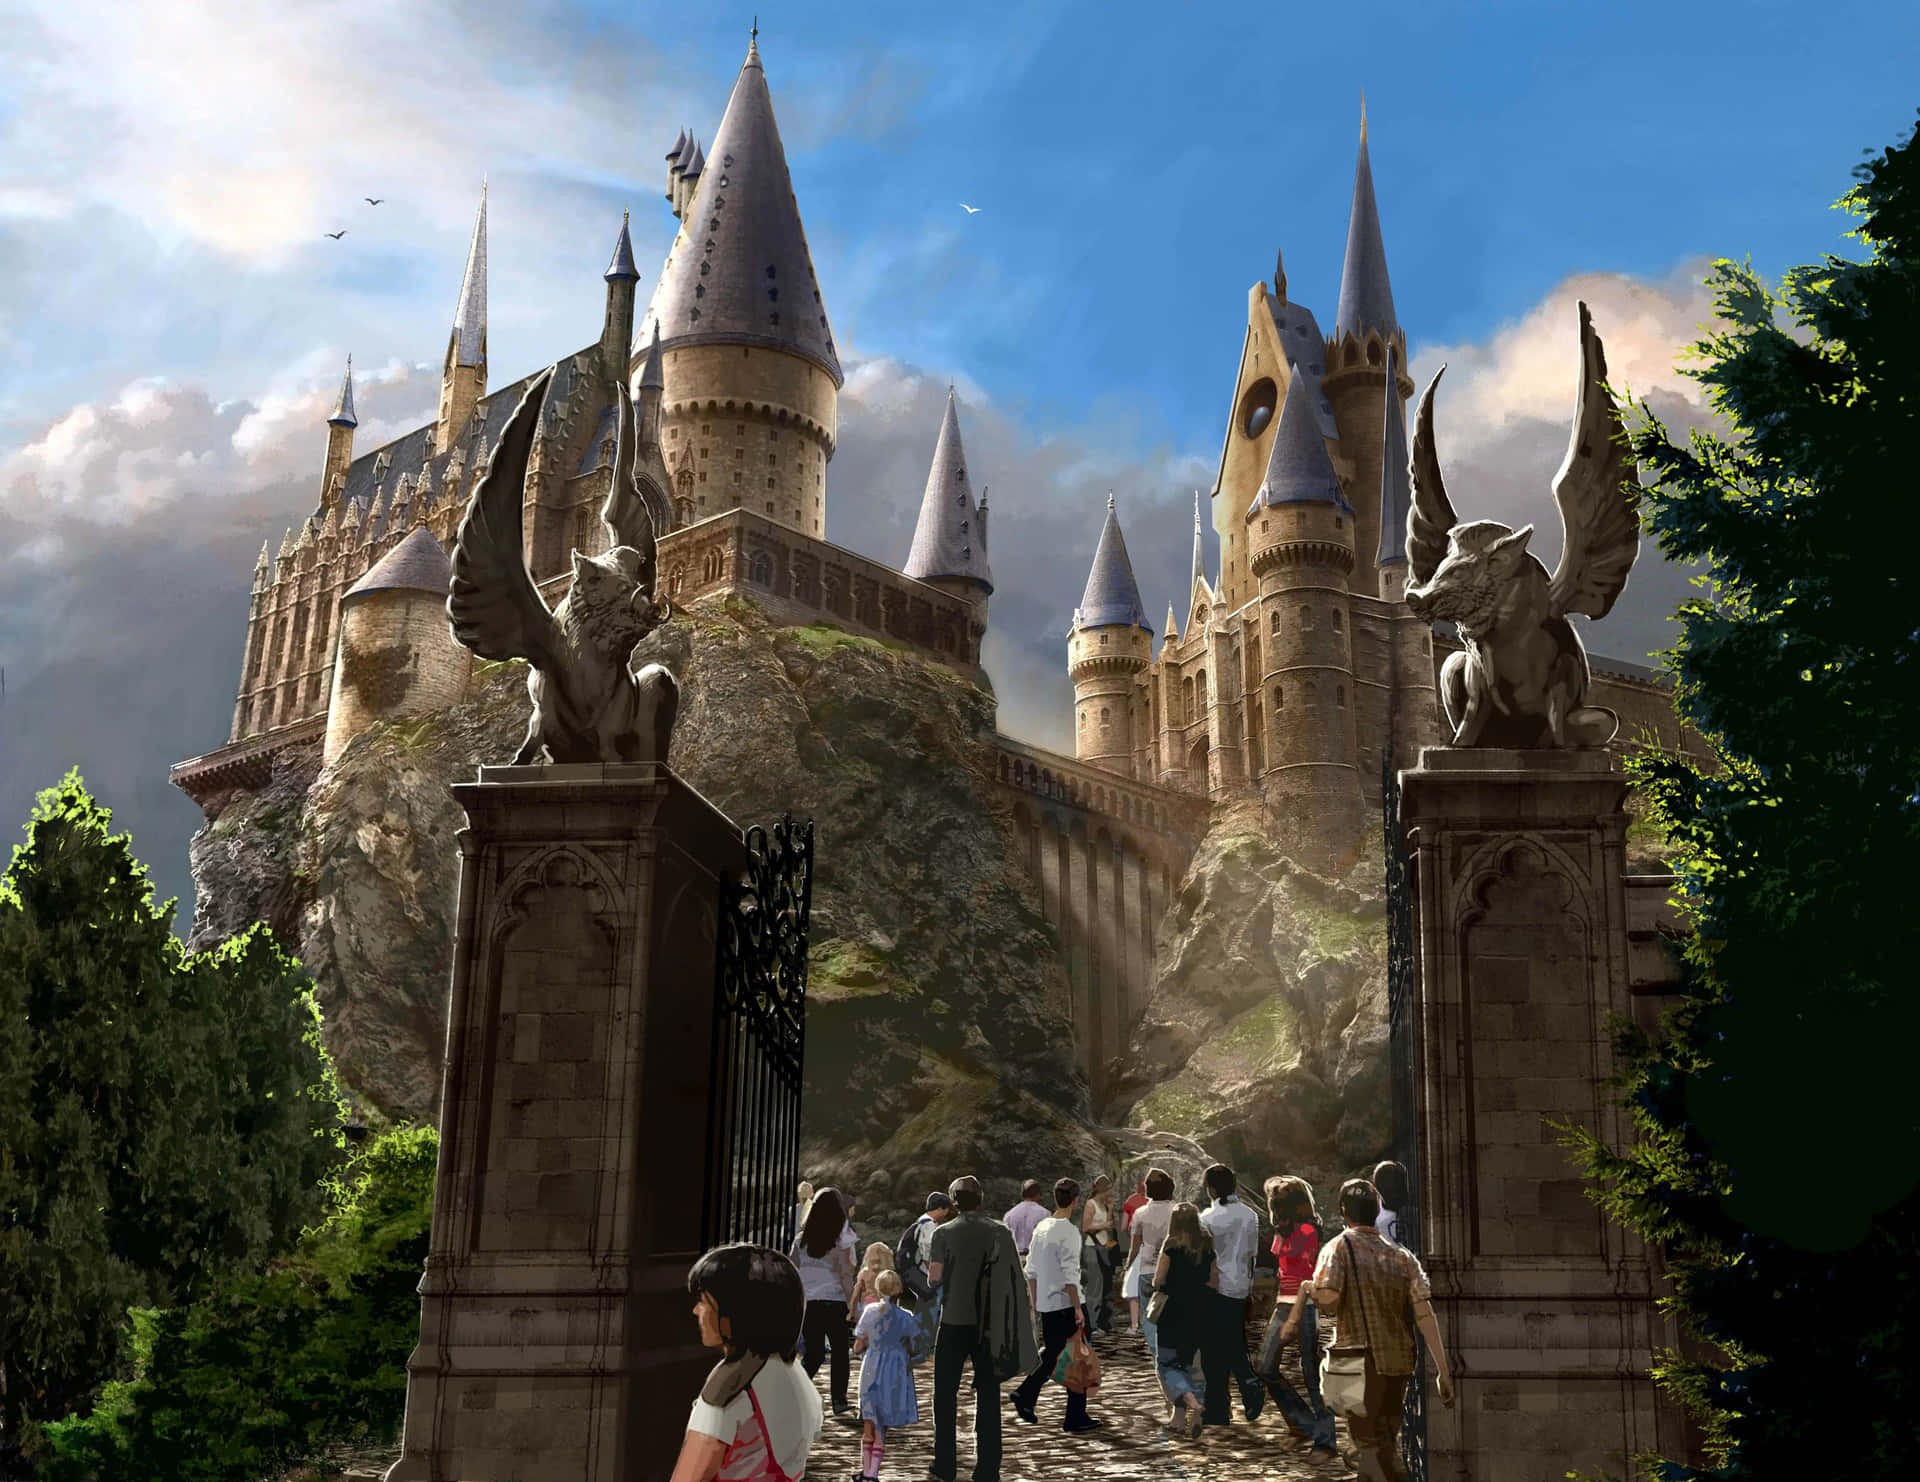 "Welcome to Hogwarts - The Most Magical School in the World"